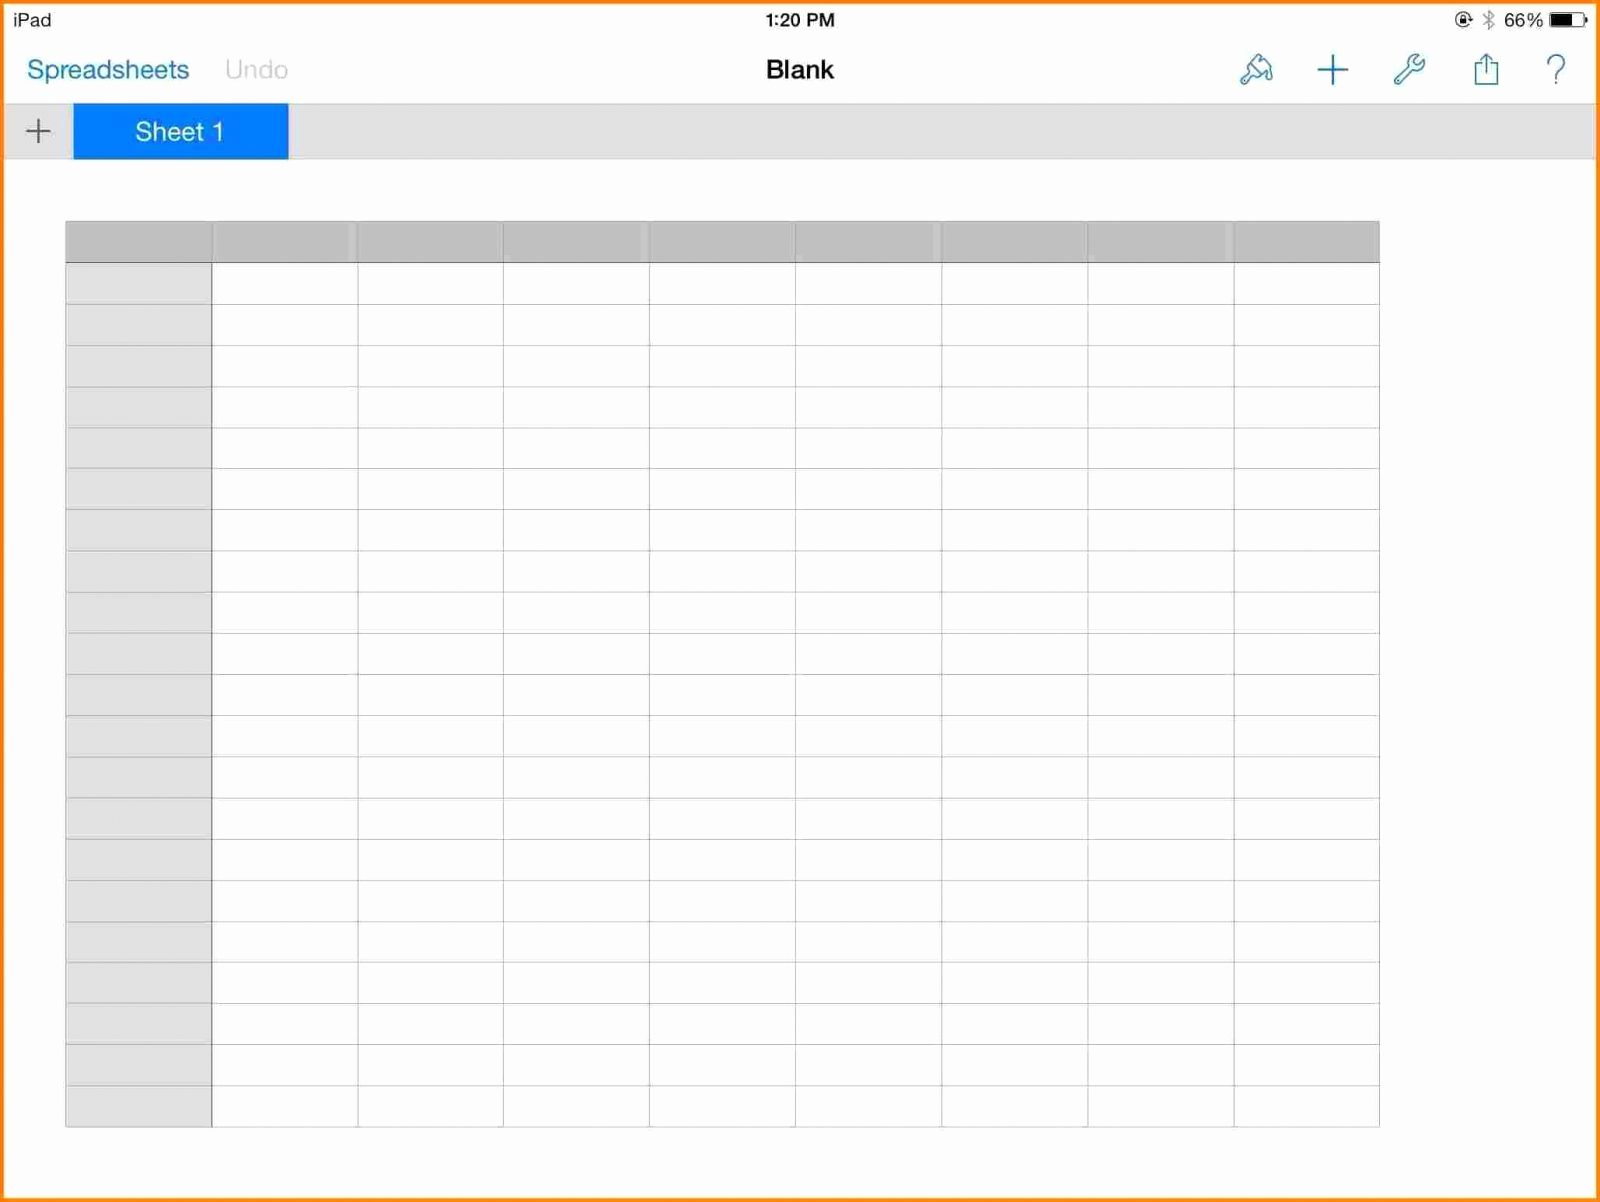 Spreadsheets On Mac For Spreadsheet Examples Free Excel Small within Accounting Spreadsheets For Small Business